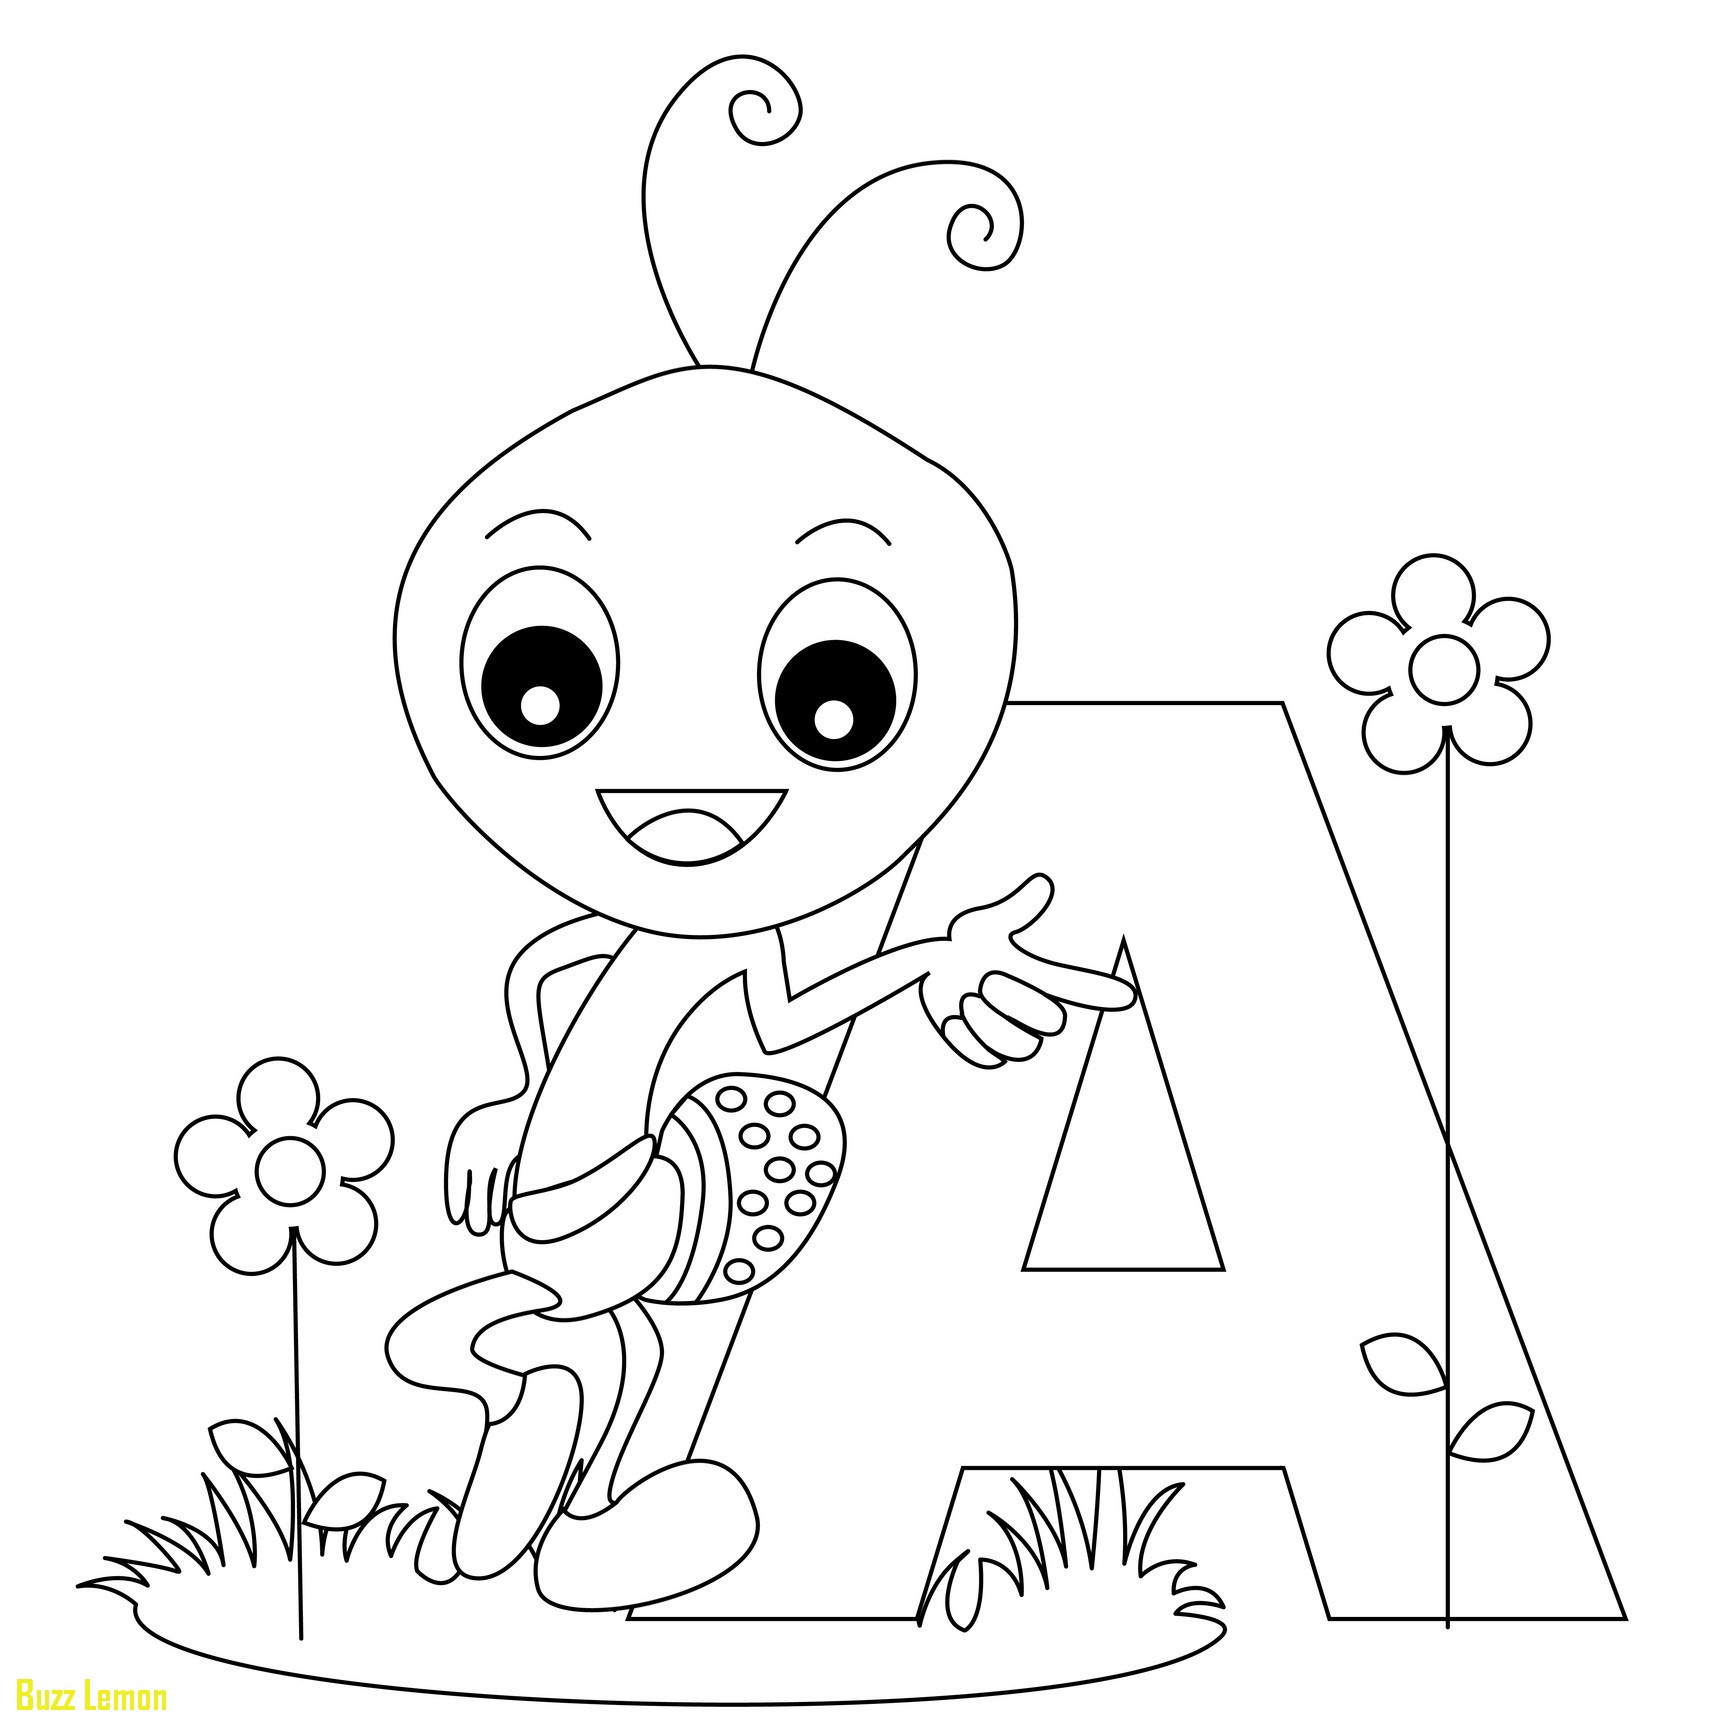 coloring-pages-worksheets-at-getcolorings-free-printable-colorings-pages-to-print-and-color